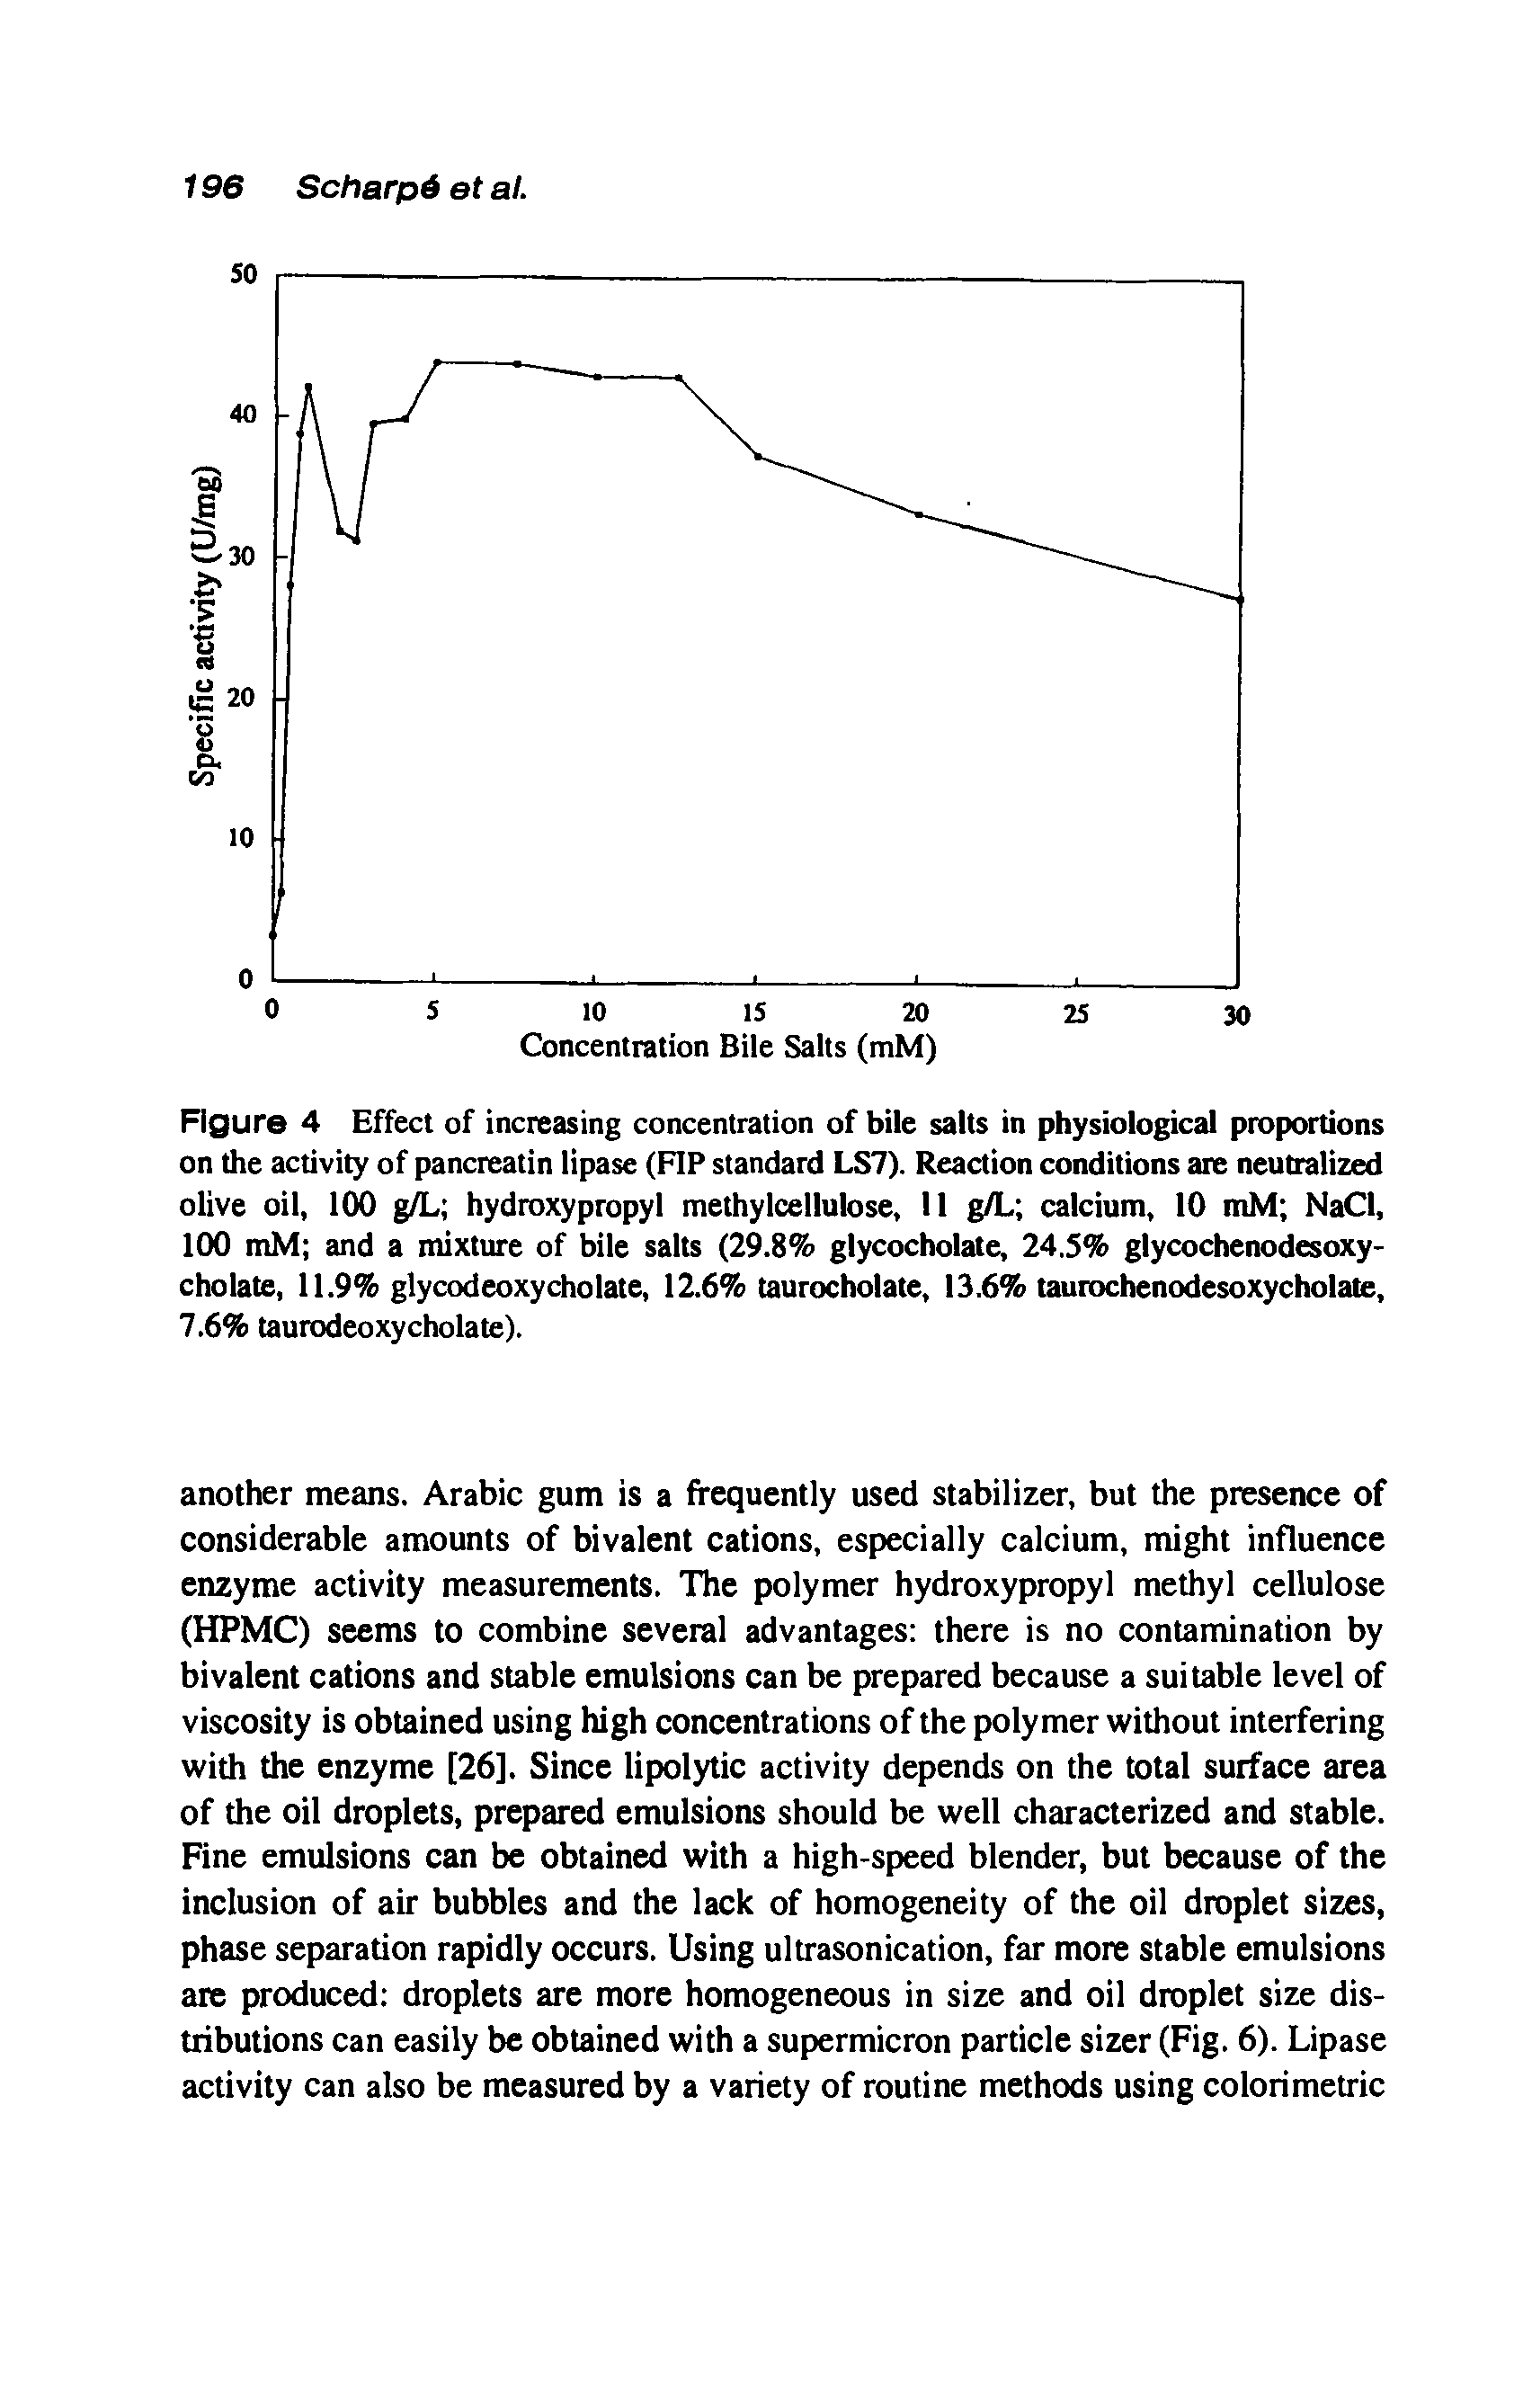 Figure 4 Effect of increasing concentration of bile salts in physiological proportions on the activity of pancreatin lipase (FIP standard LS7). Reaction conditions are neutralized olive oil, 100 g/L hydroxypropyl methylcellulose, 11 g/L calcium, 10 mM NaCl, 100 mM and a mixture of bile salts (29.8% glycocholate, 24.5% glycochenodesoxy-cholate, 11.9% glycodeoxycholate, 12.6% taurocholate, 13.6% taurochenodesoxycholate, 7.6% taurodeoxycholate).